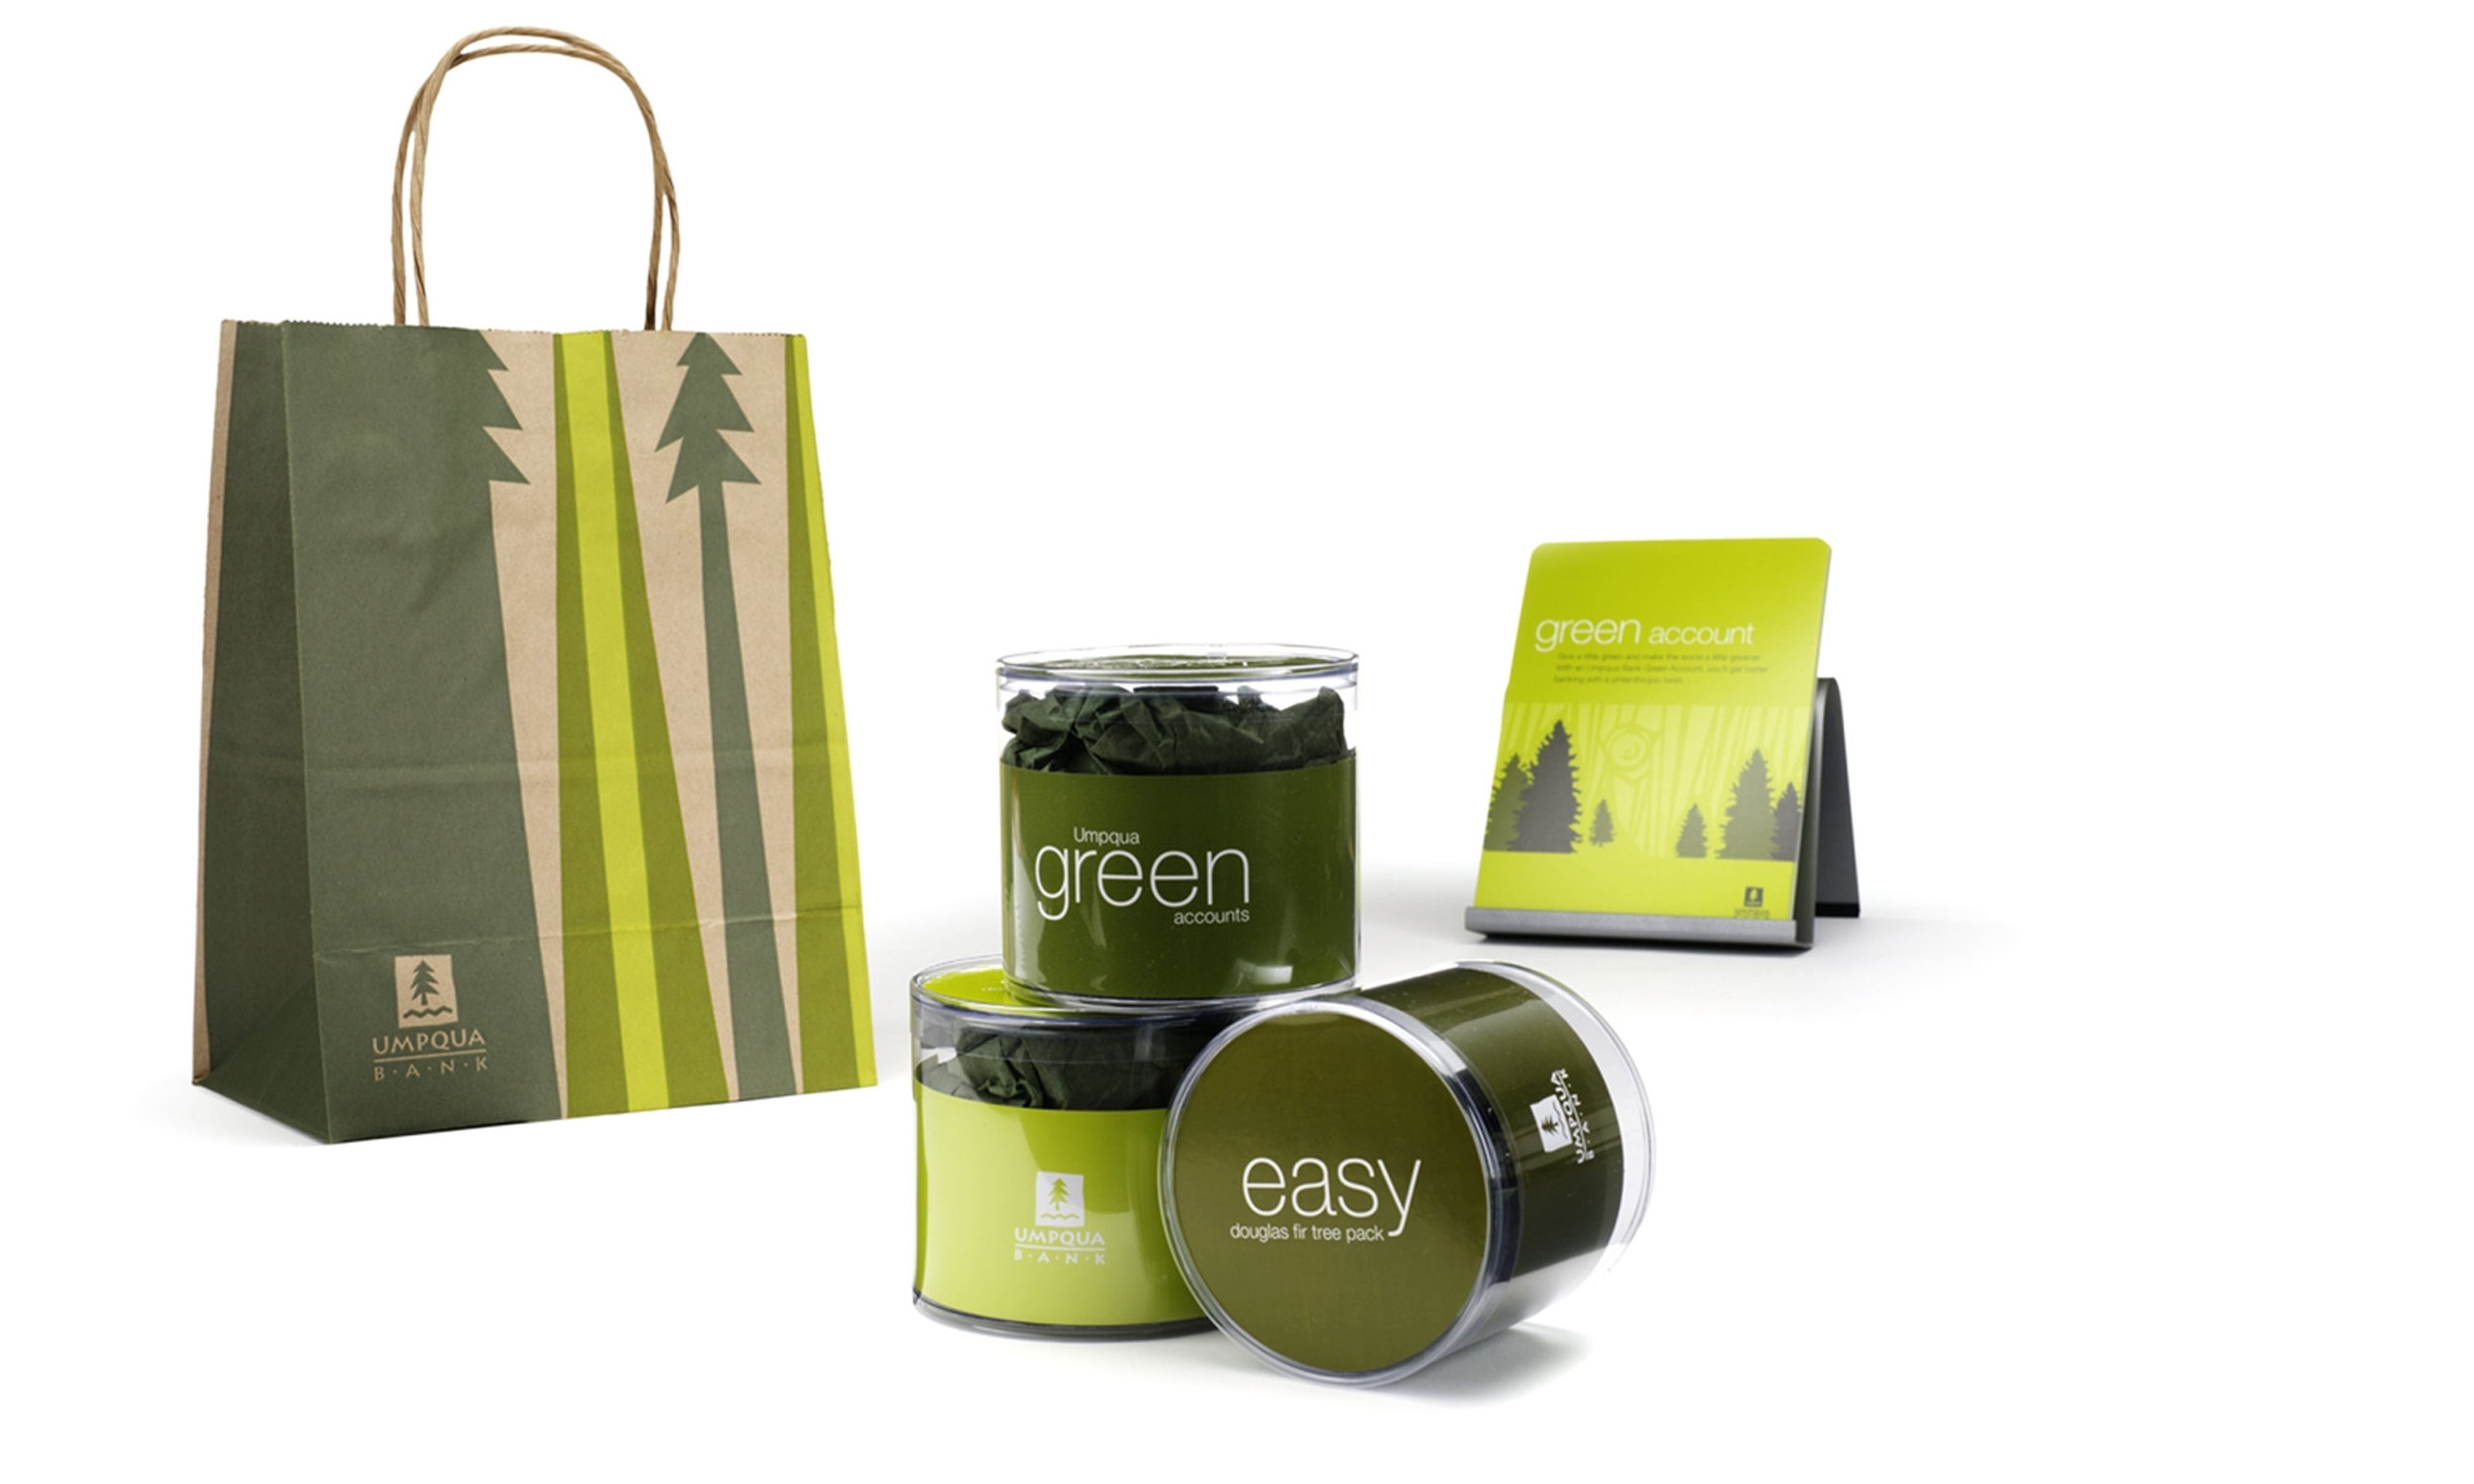 Paper bag with the Umpqua Bank logo and green illustrated trees, three jars containing Douglas fir cones, and a green business card that says “green account”